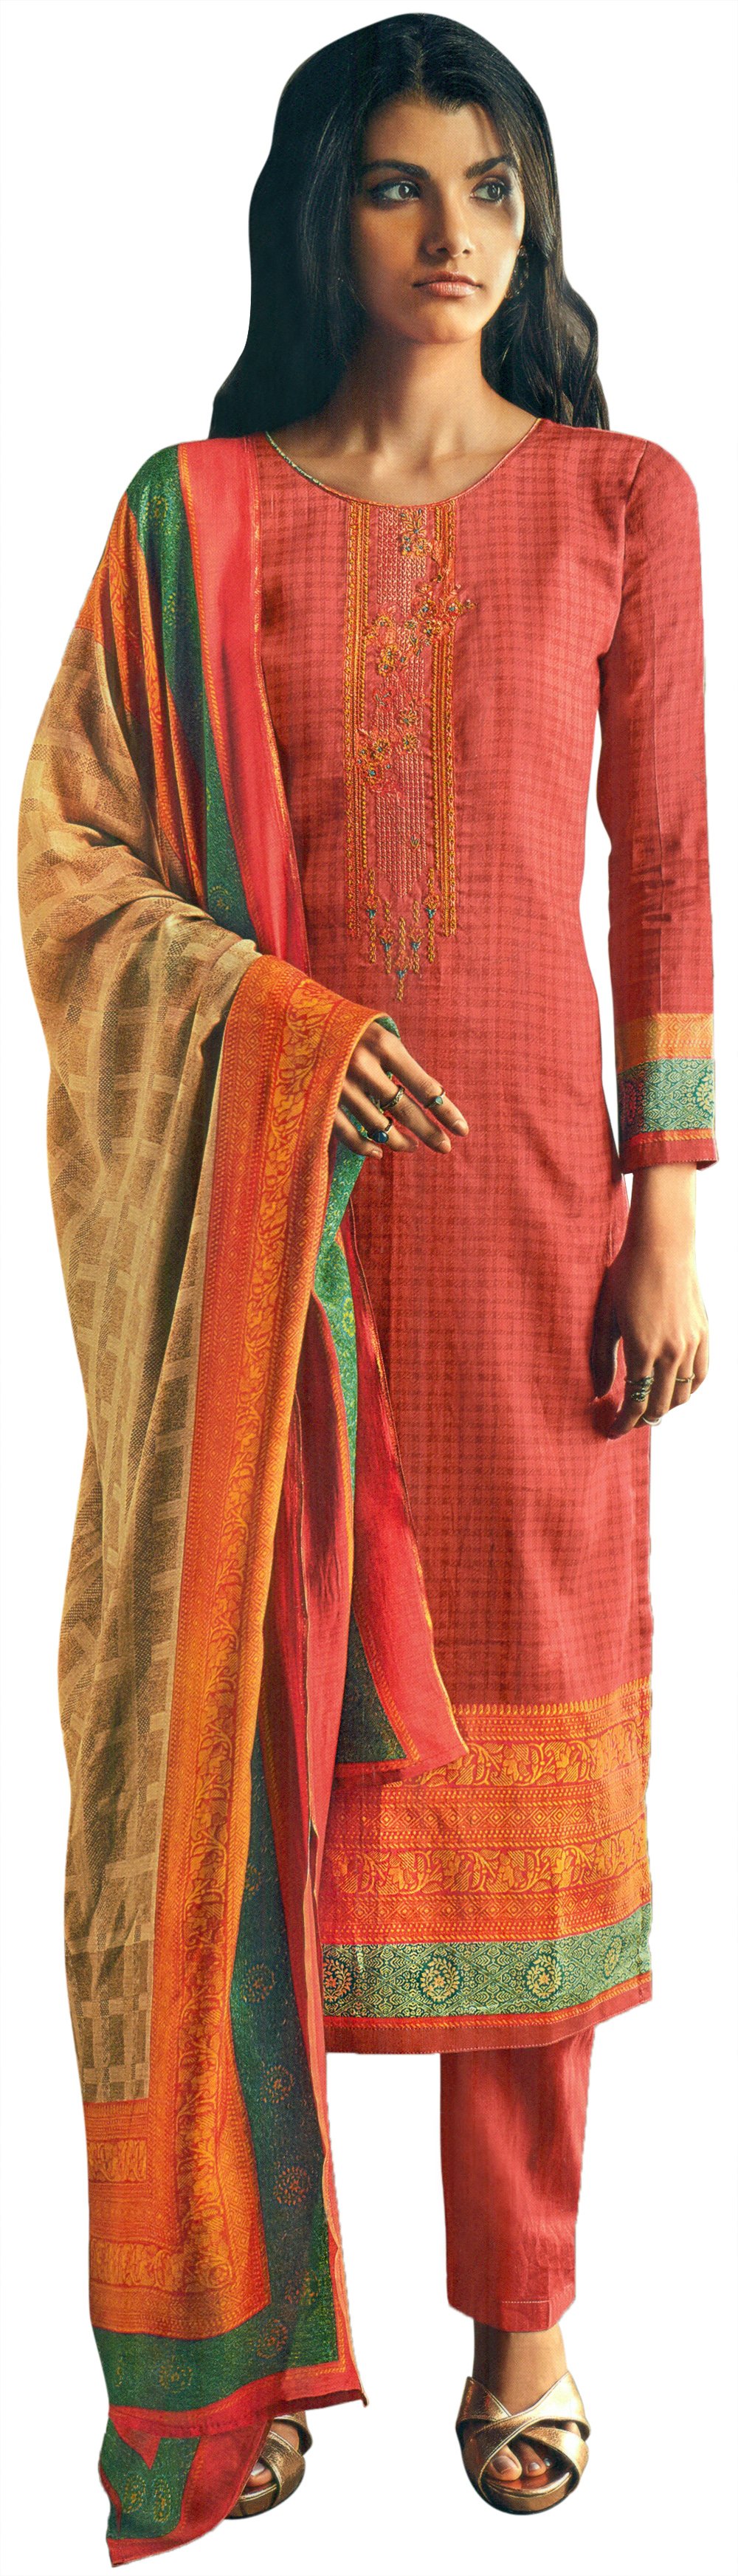 FlameScarlet Long Trouser SalwarKameez Suit with Embroidery on Neck and  Beige Banarasi Dupatta  Exotic India Art